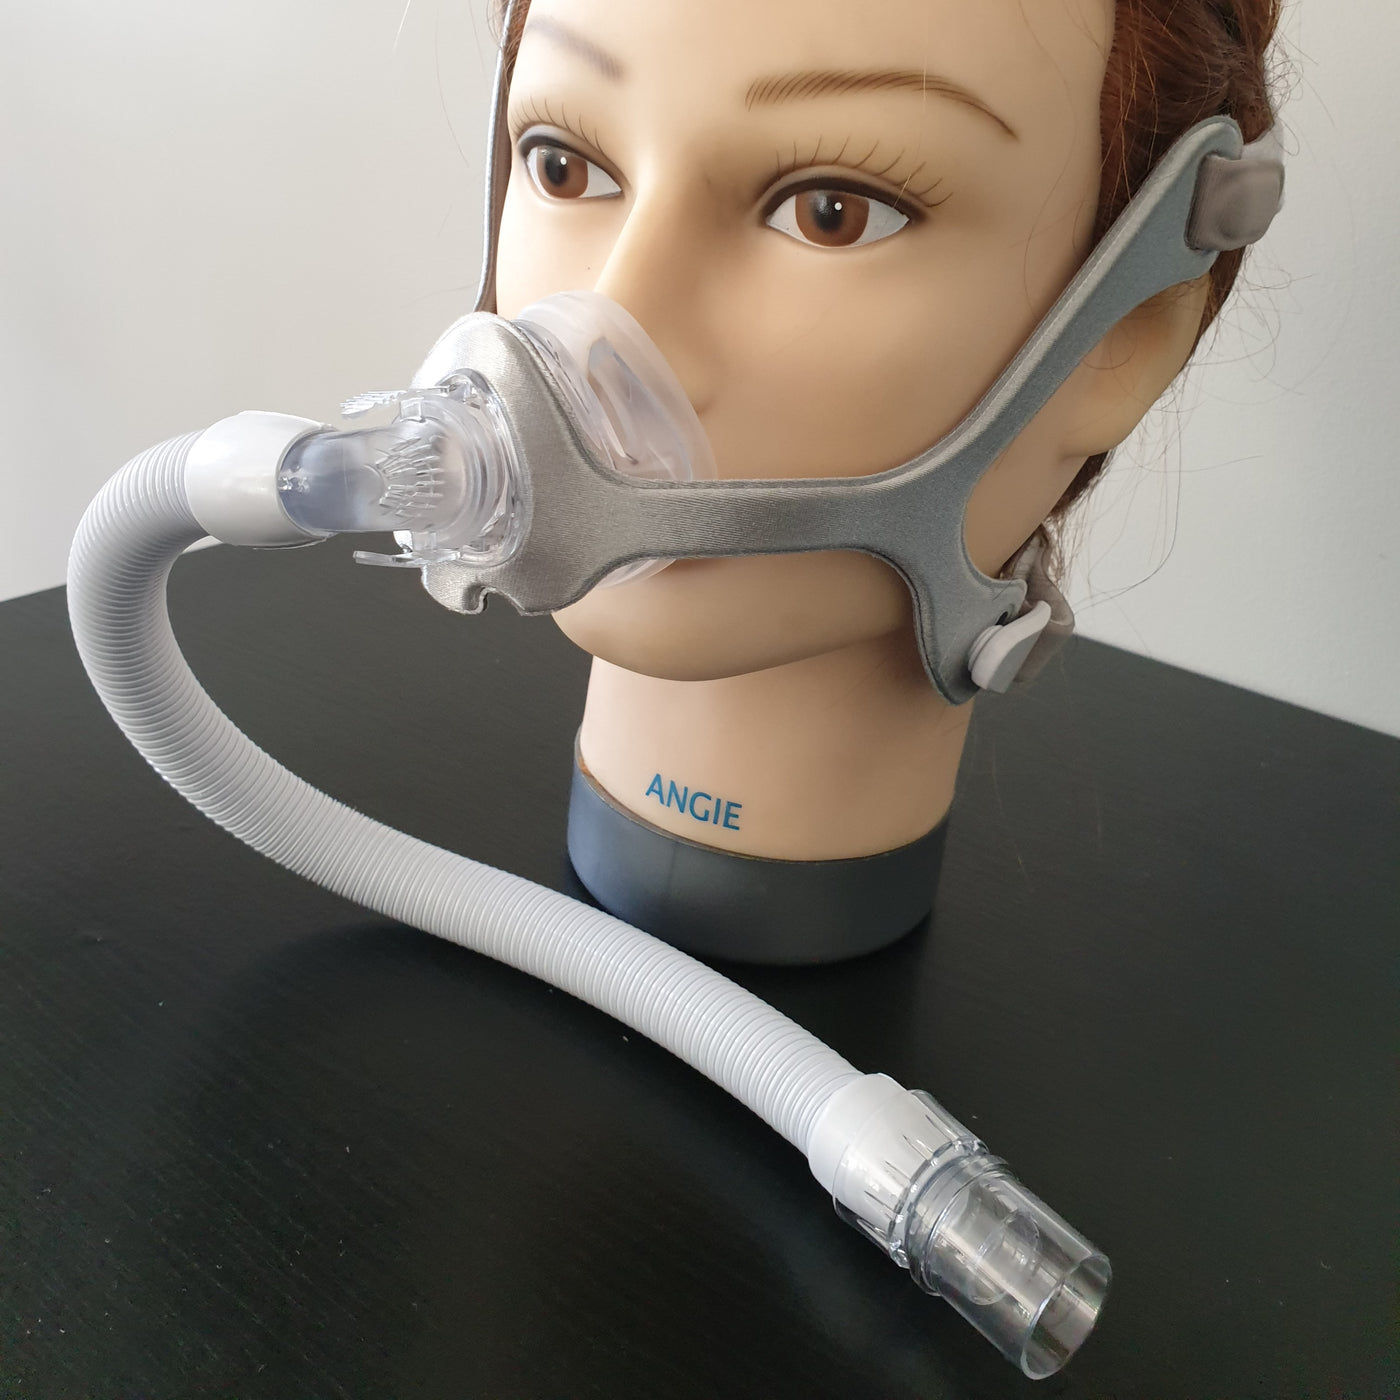 Philips Respironics Wisp CPAP mask Clear / Fabric / Paediatric, frame, strap, all cushions